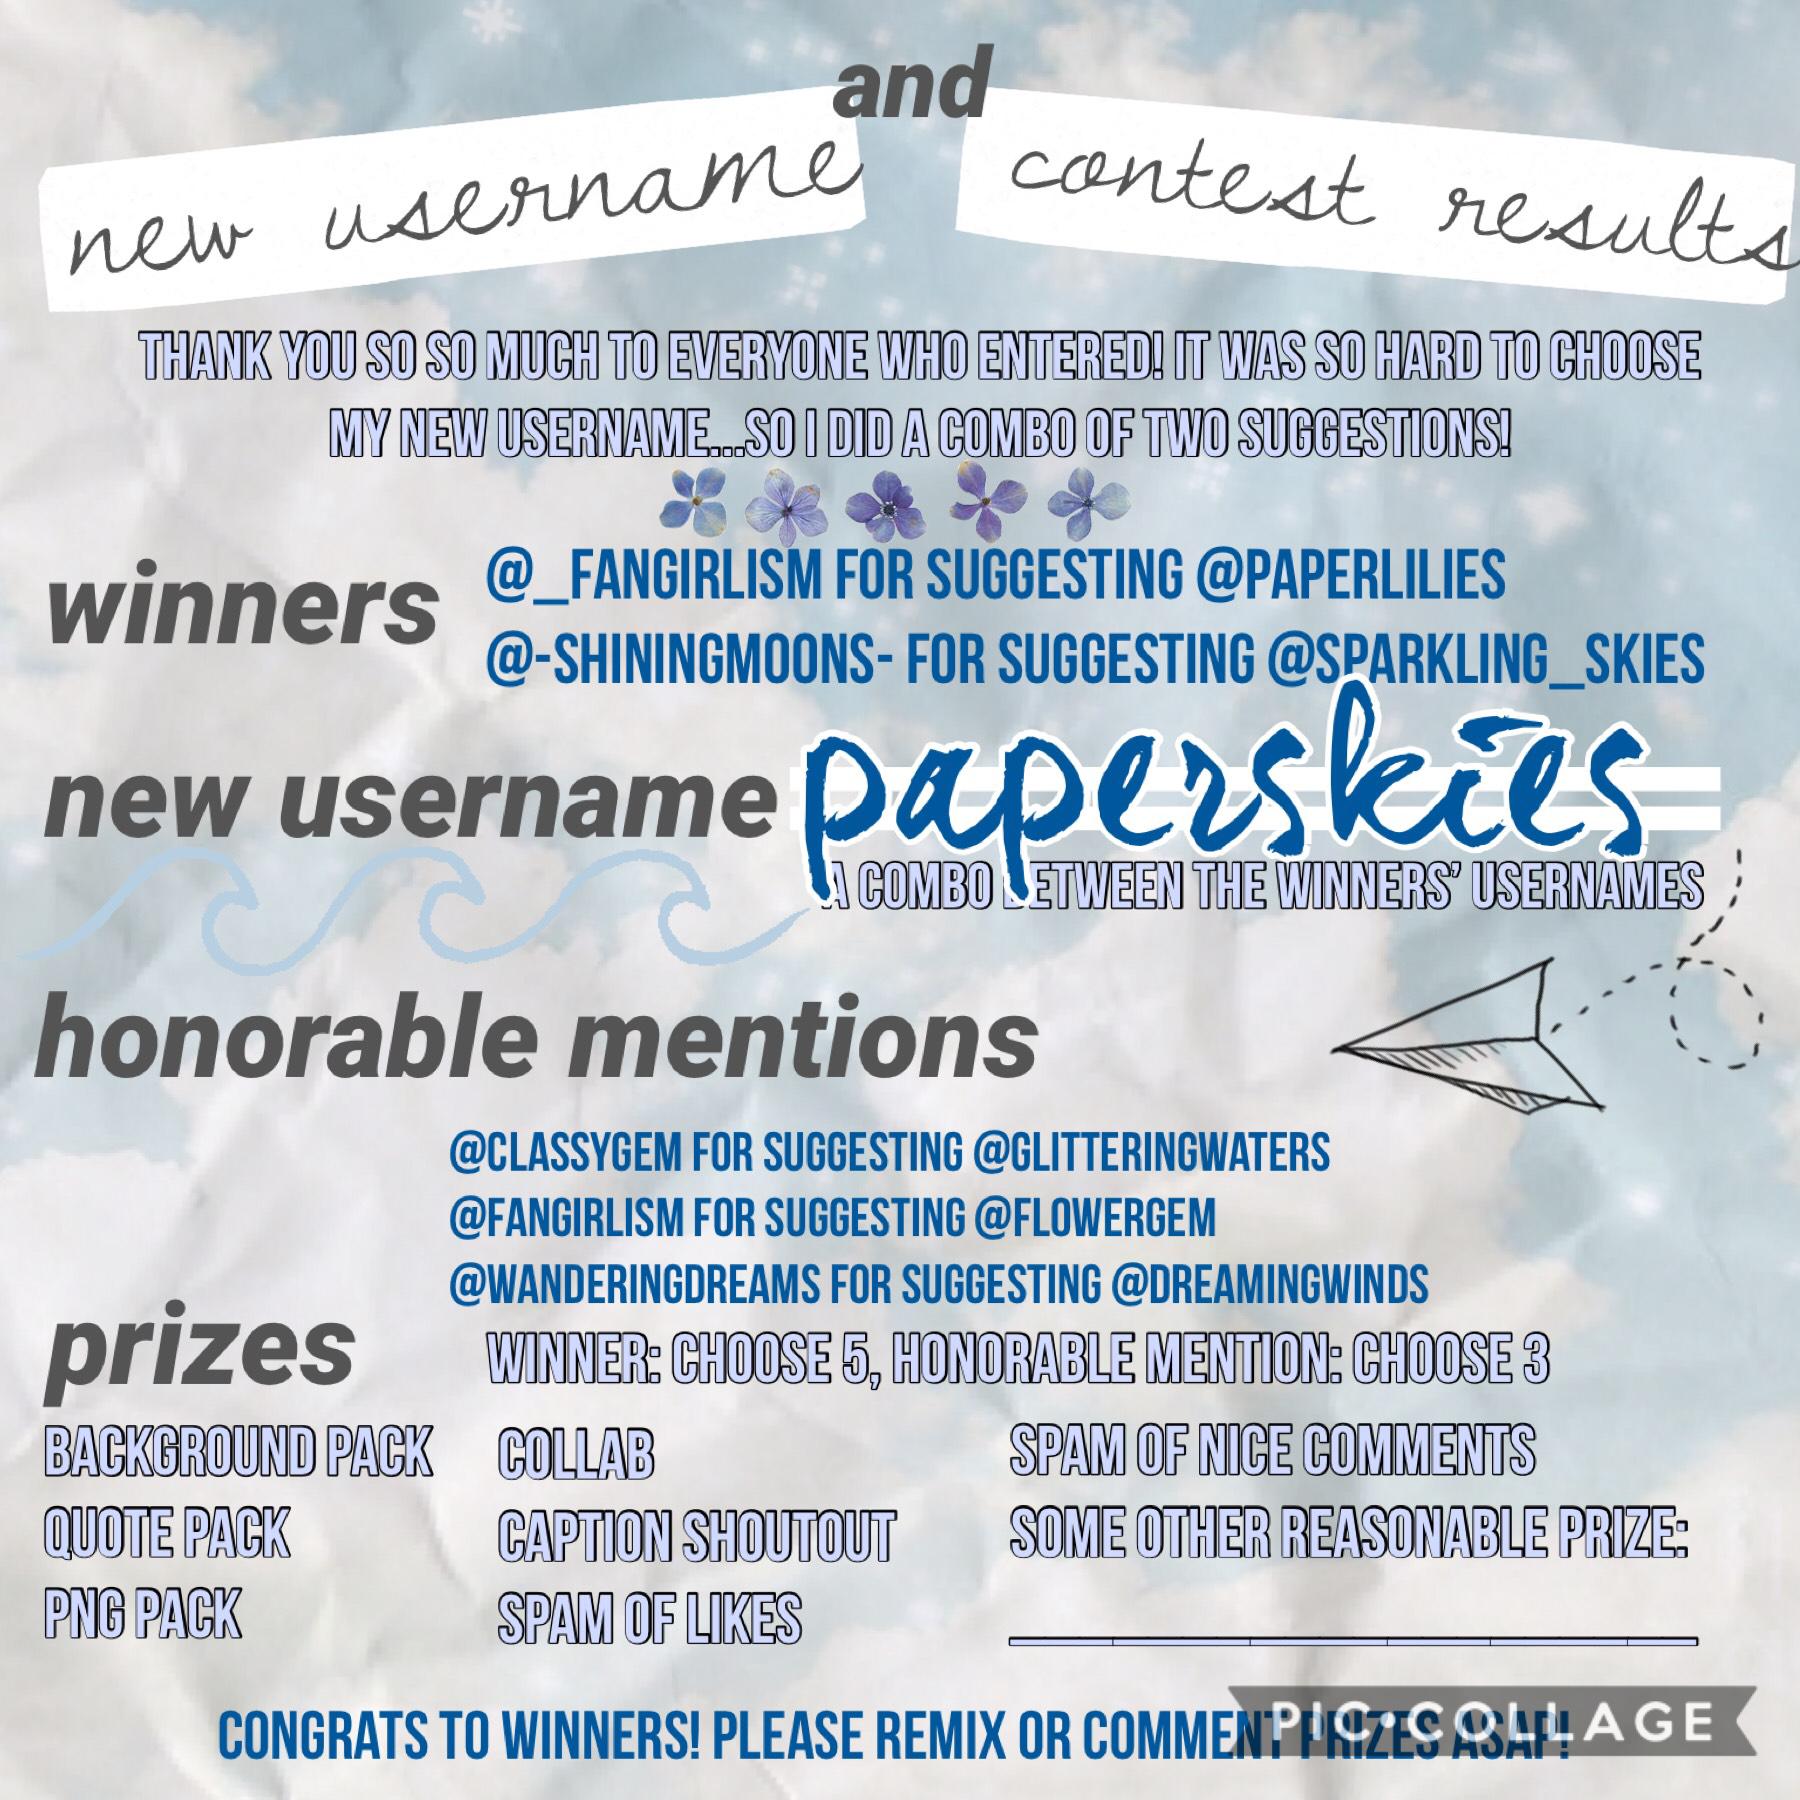 Officially changing username to @paperskies! 📃☀️☁️congrats to winnersss!
[9/19/2018]